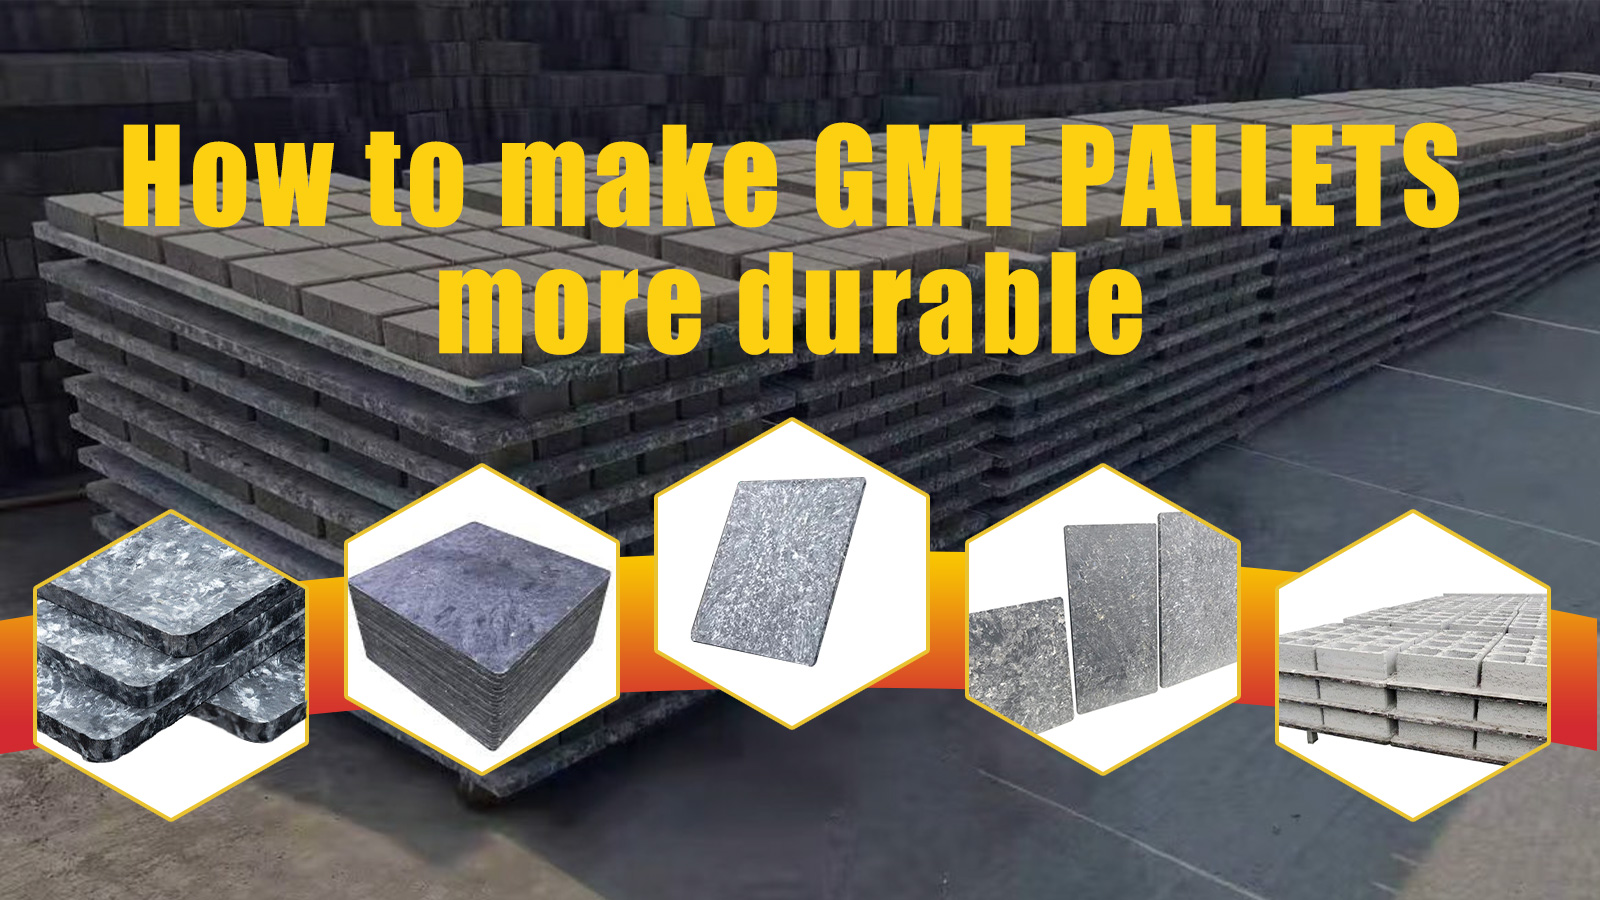 How to make GMT pallets more durable